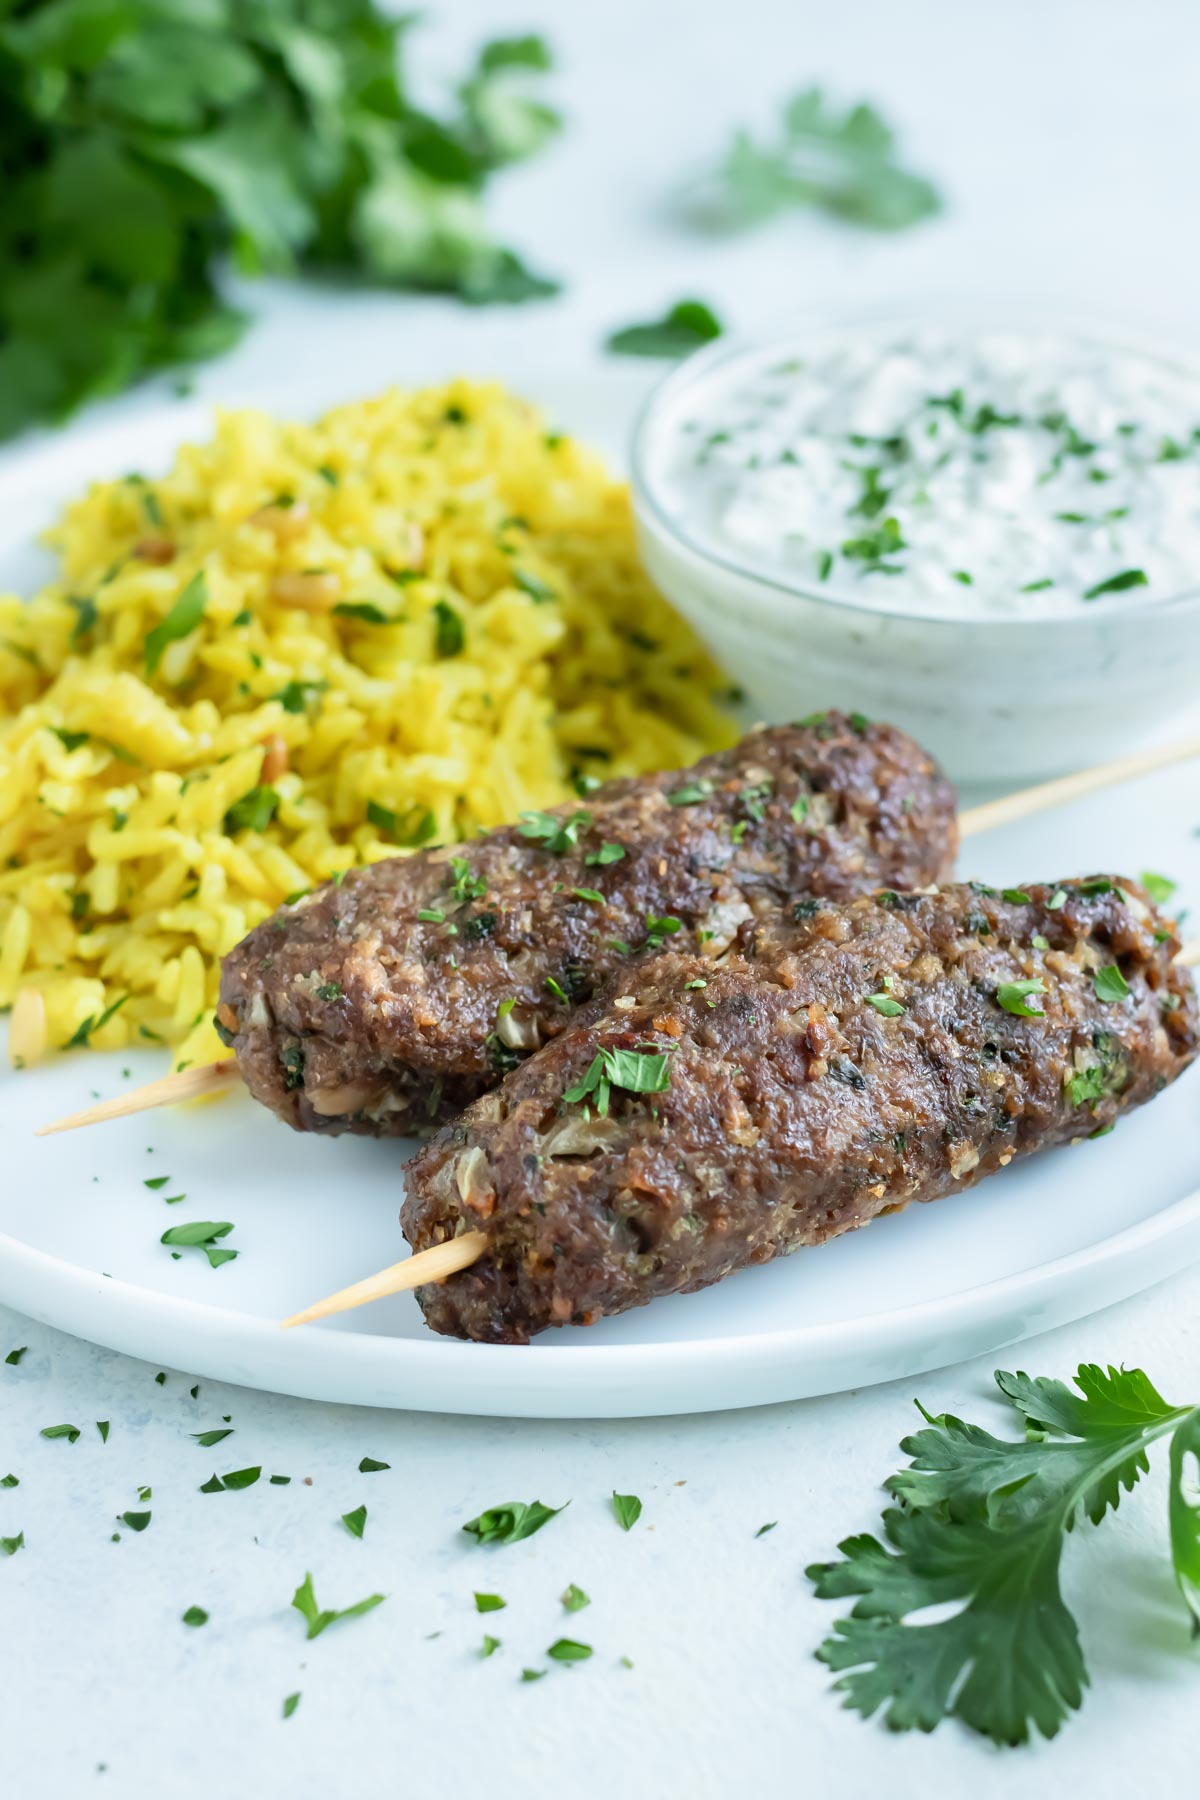 Yellow rice is served with Lamb Kofta for a healthy meal.